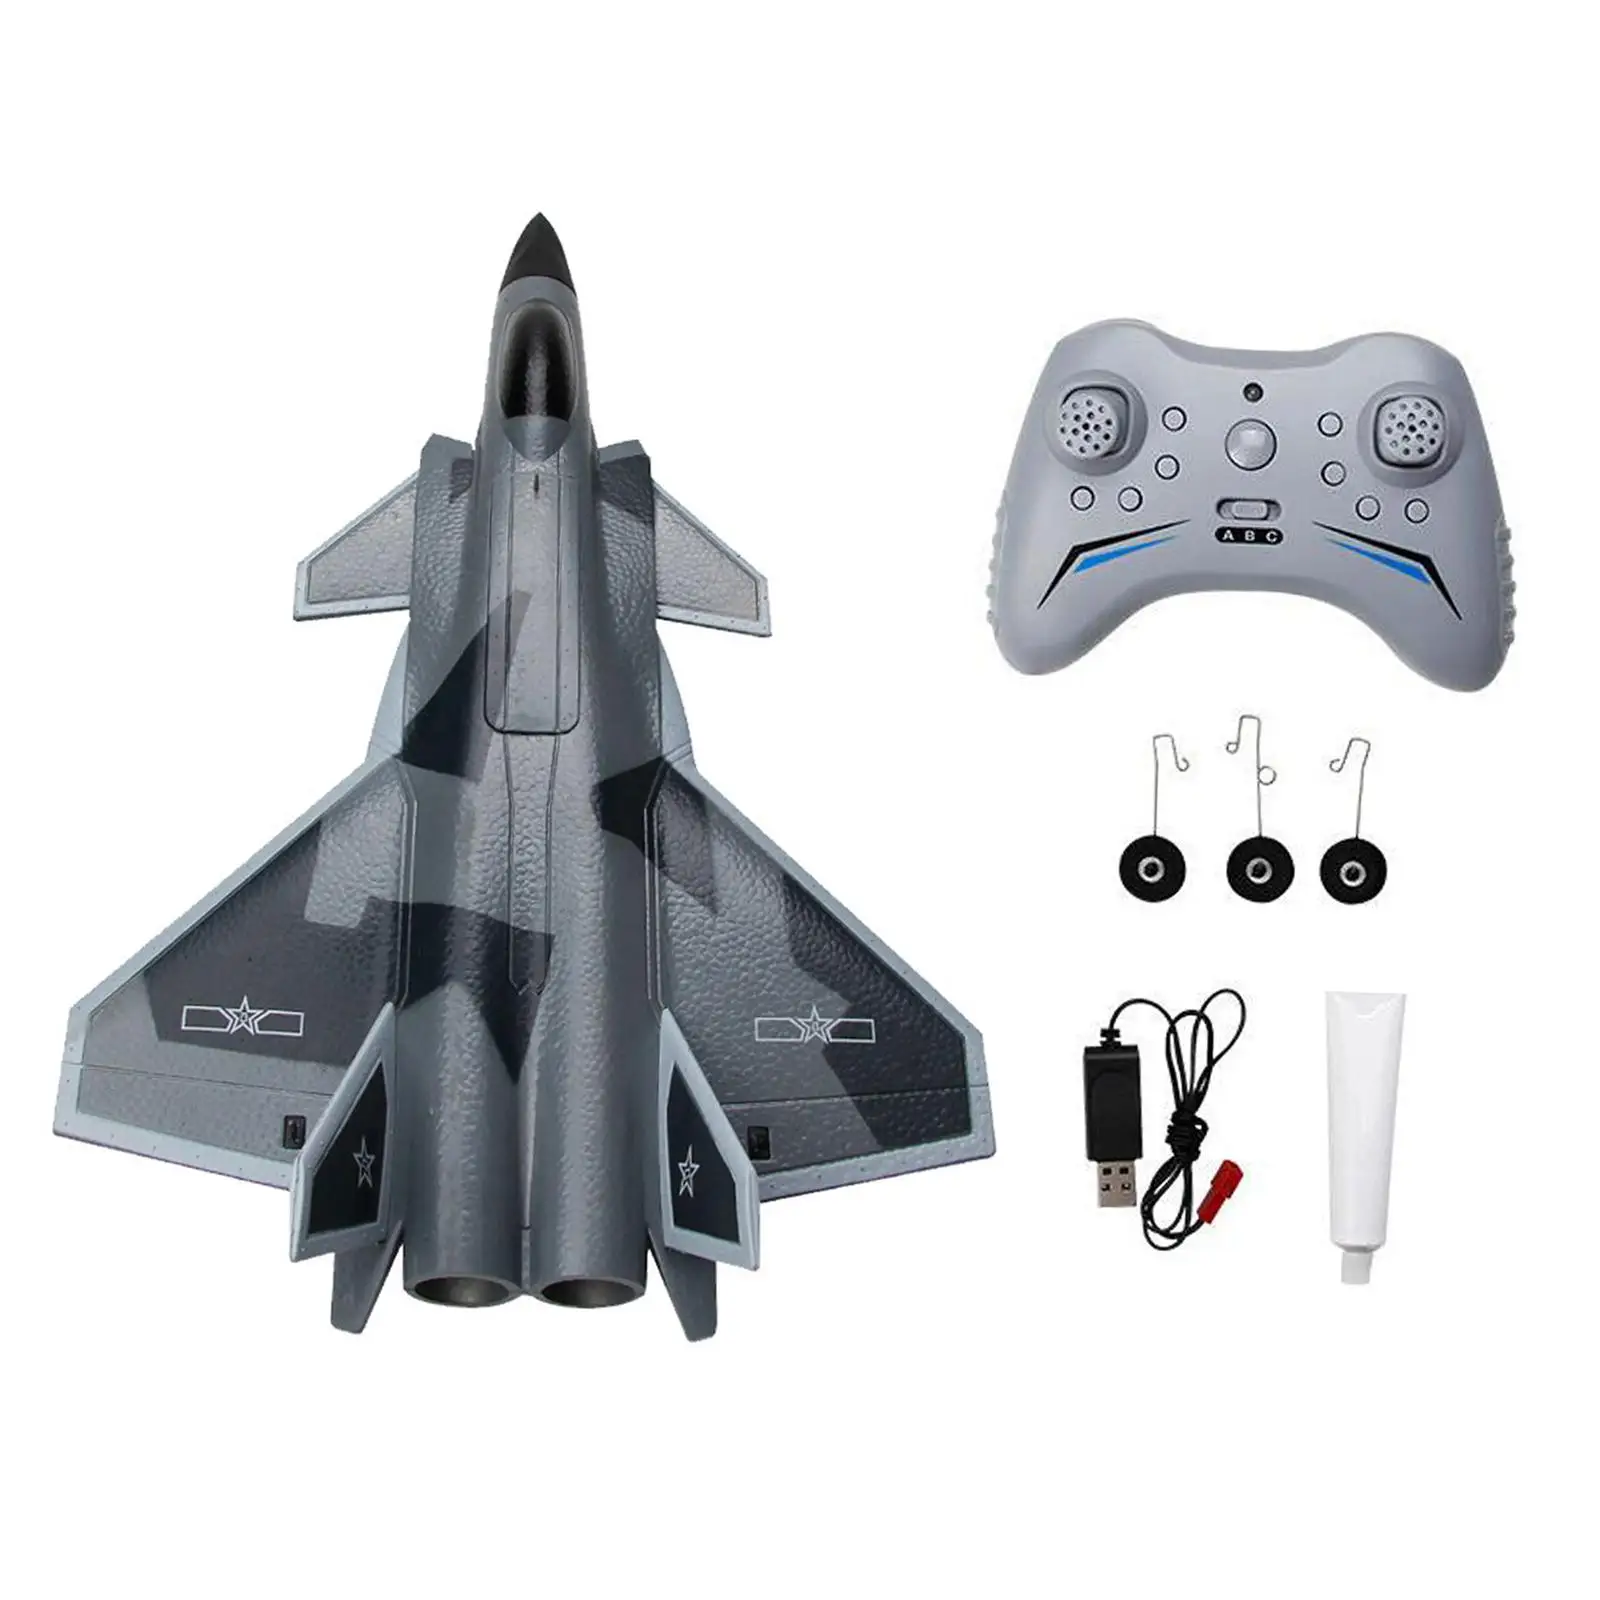 FX9630 RC Plane USB Charging Lightweight Stable Multiuse Kids Playset J20 Fighter Mini RC Airplane Model for Beginners Children